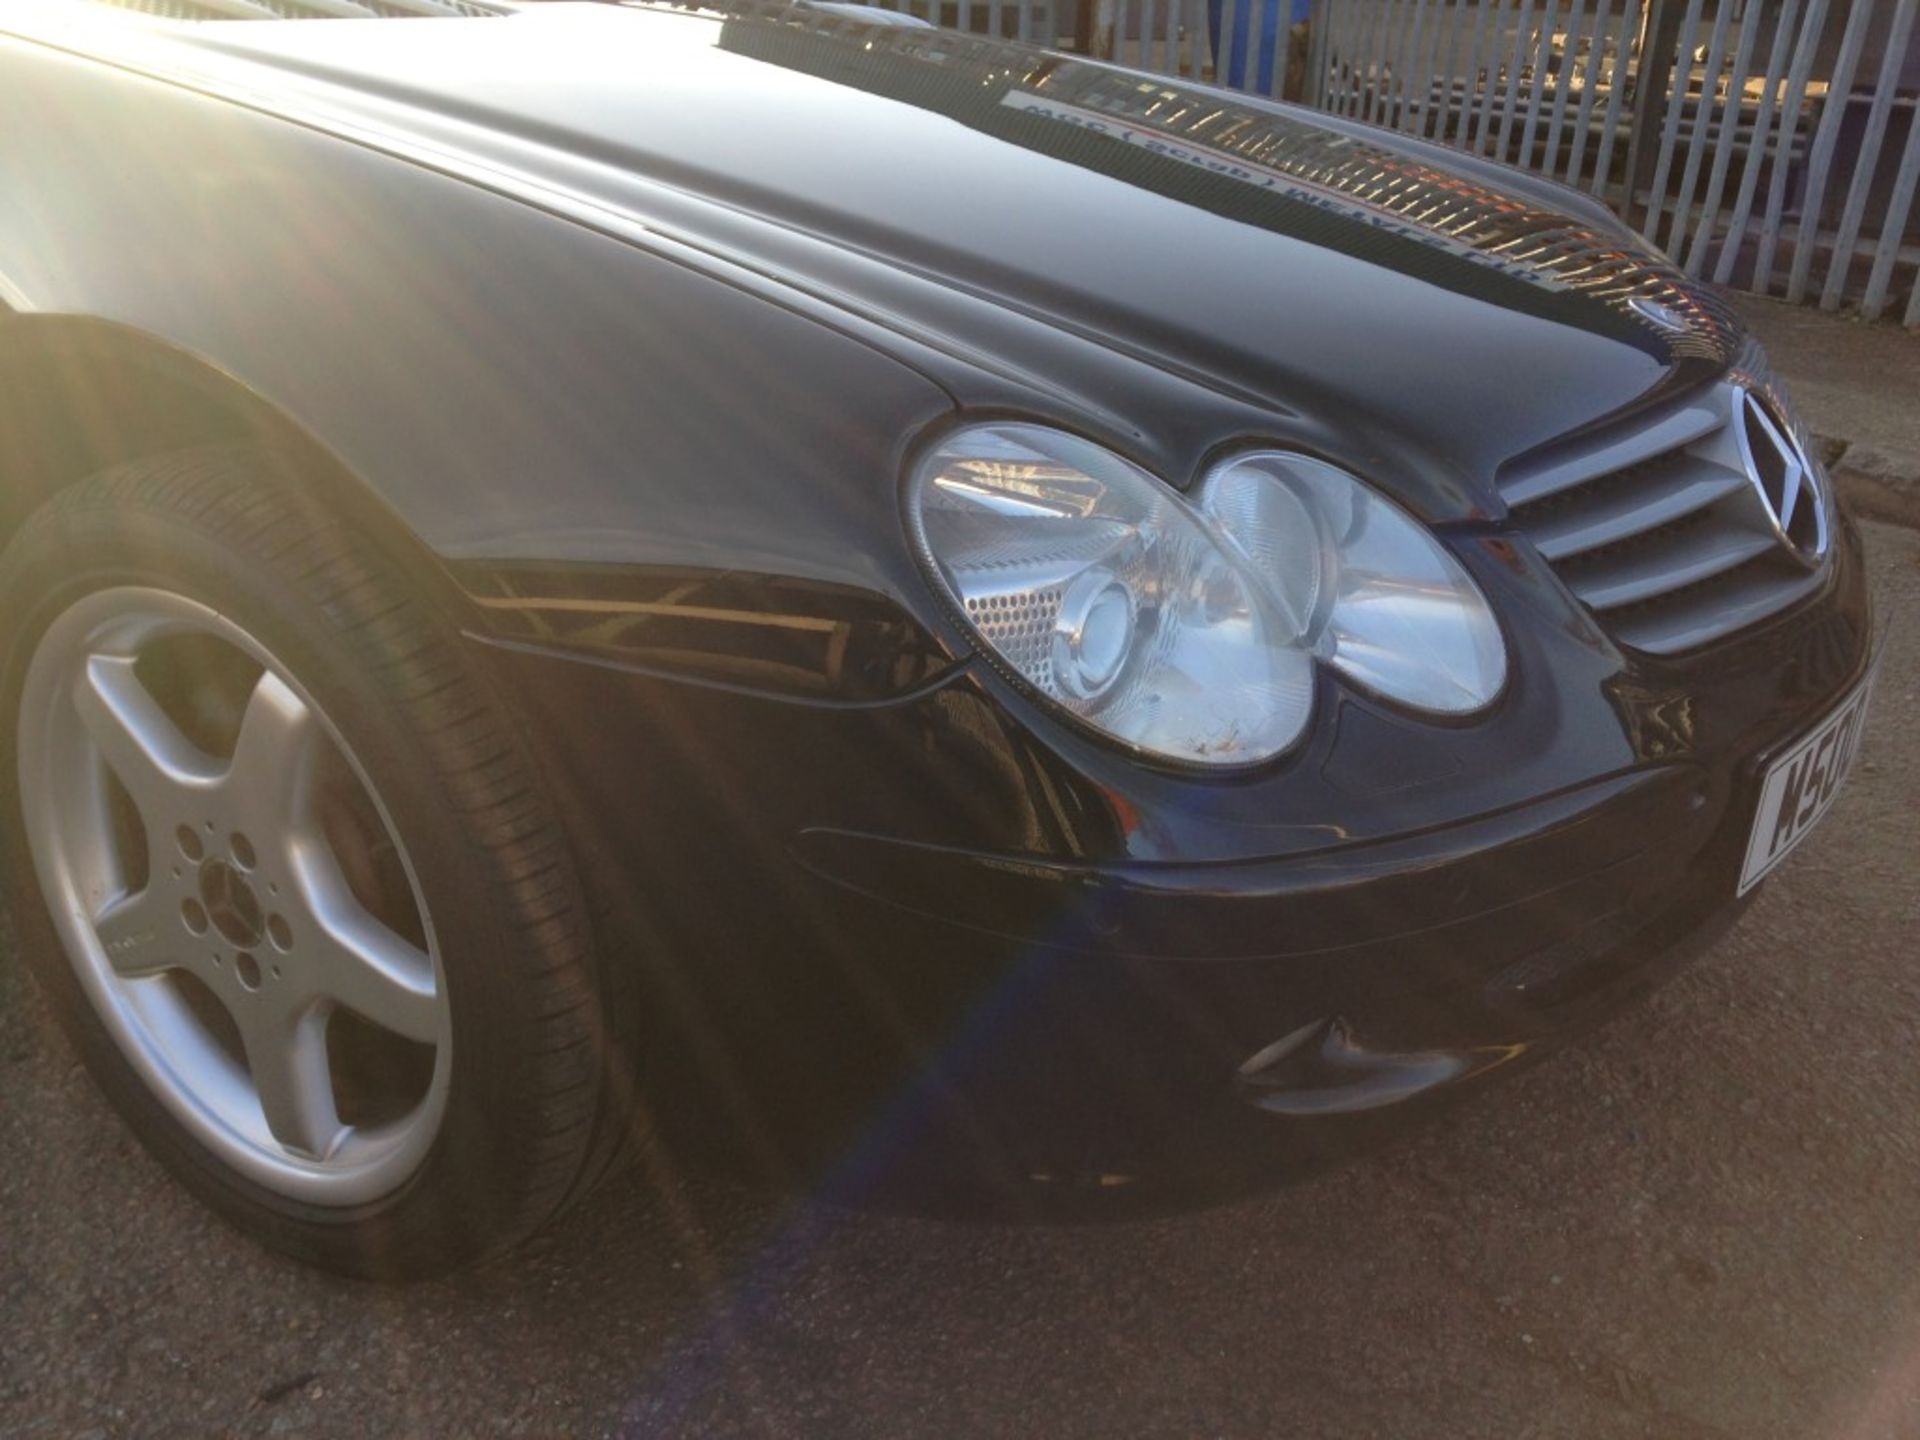 1 x Mercedes SL500 Automatic 5.0 Convertible - Petrol - Year 2002 - 94,500 Miles - Long MOT Expiry - Image 24 of 48